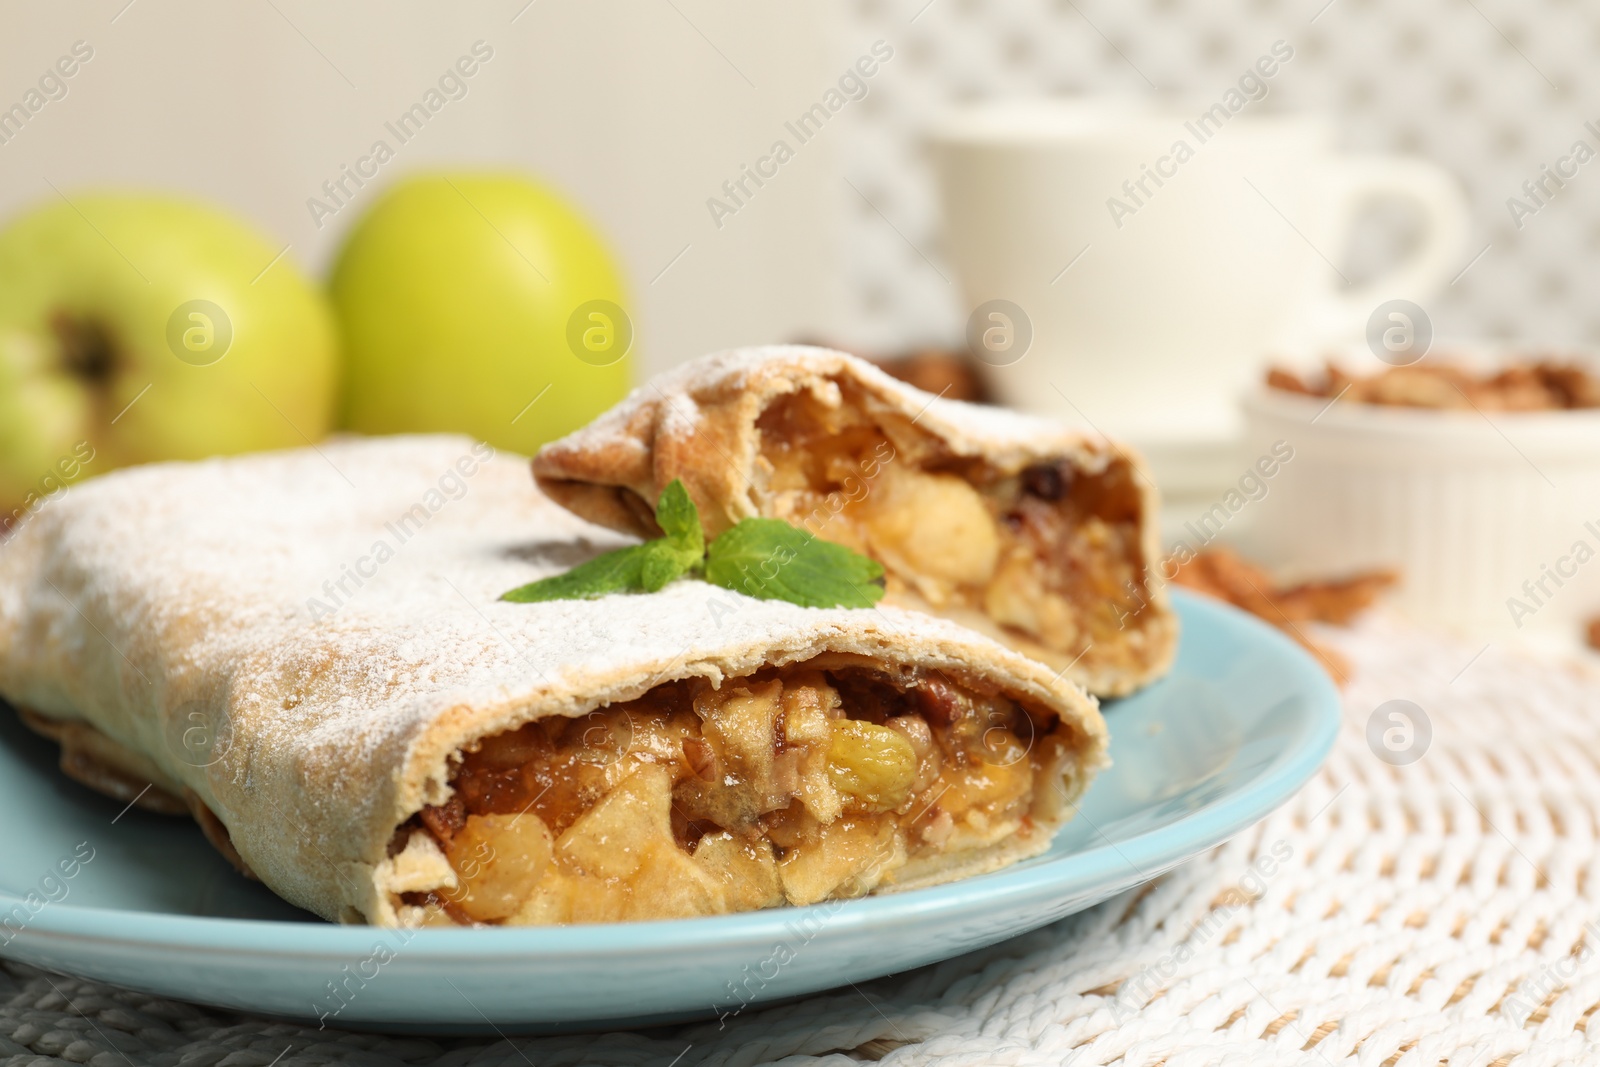 Photo of Delicious strudel with apples, nuts and raisins on wicker mat, closeup